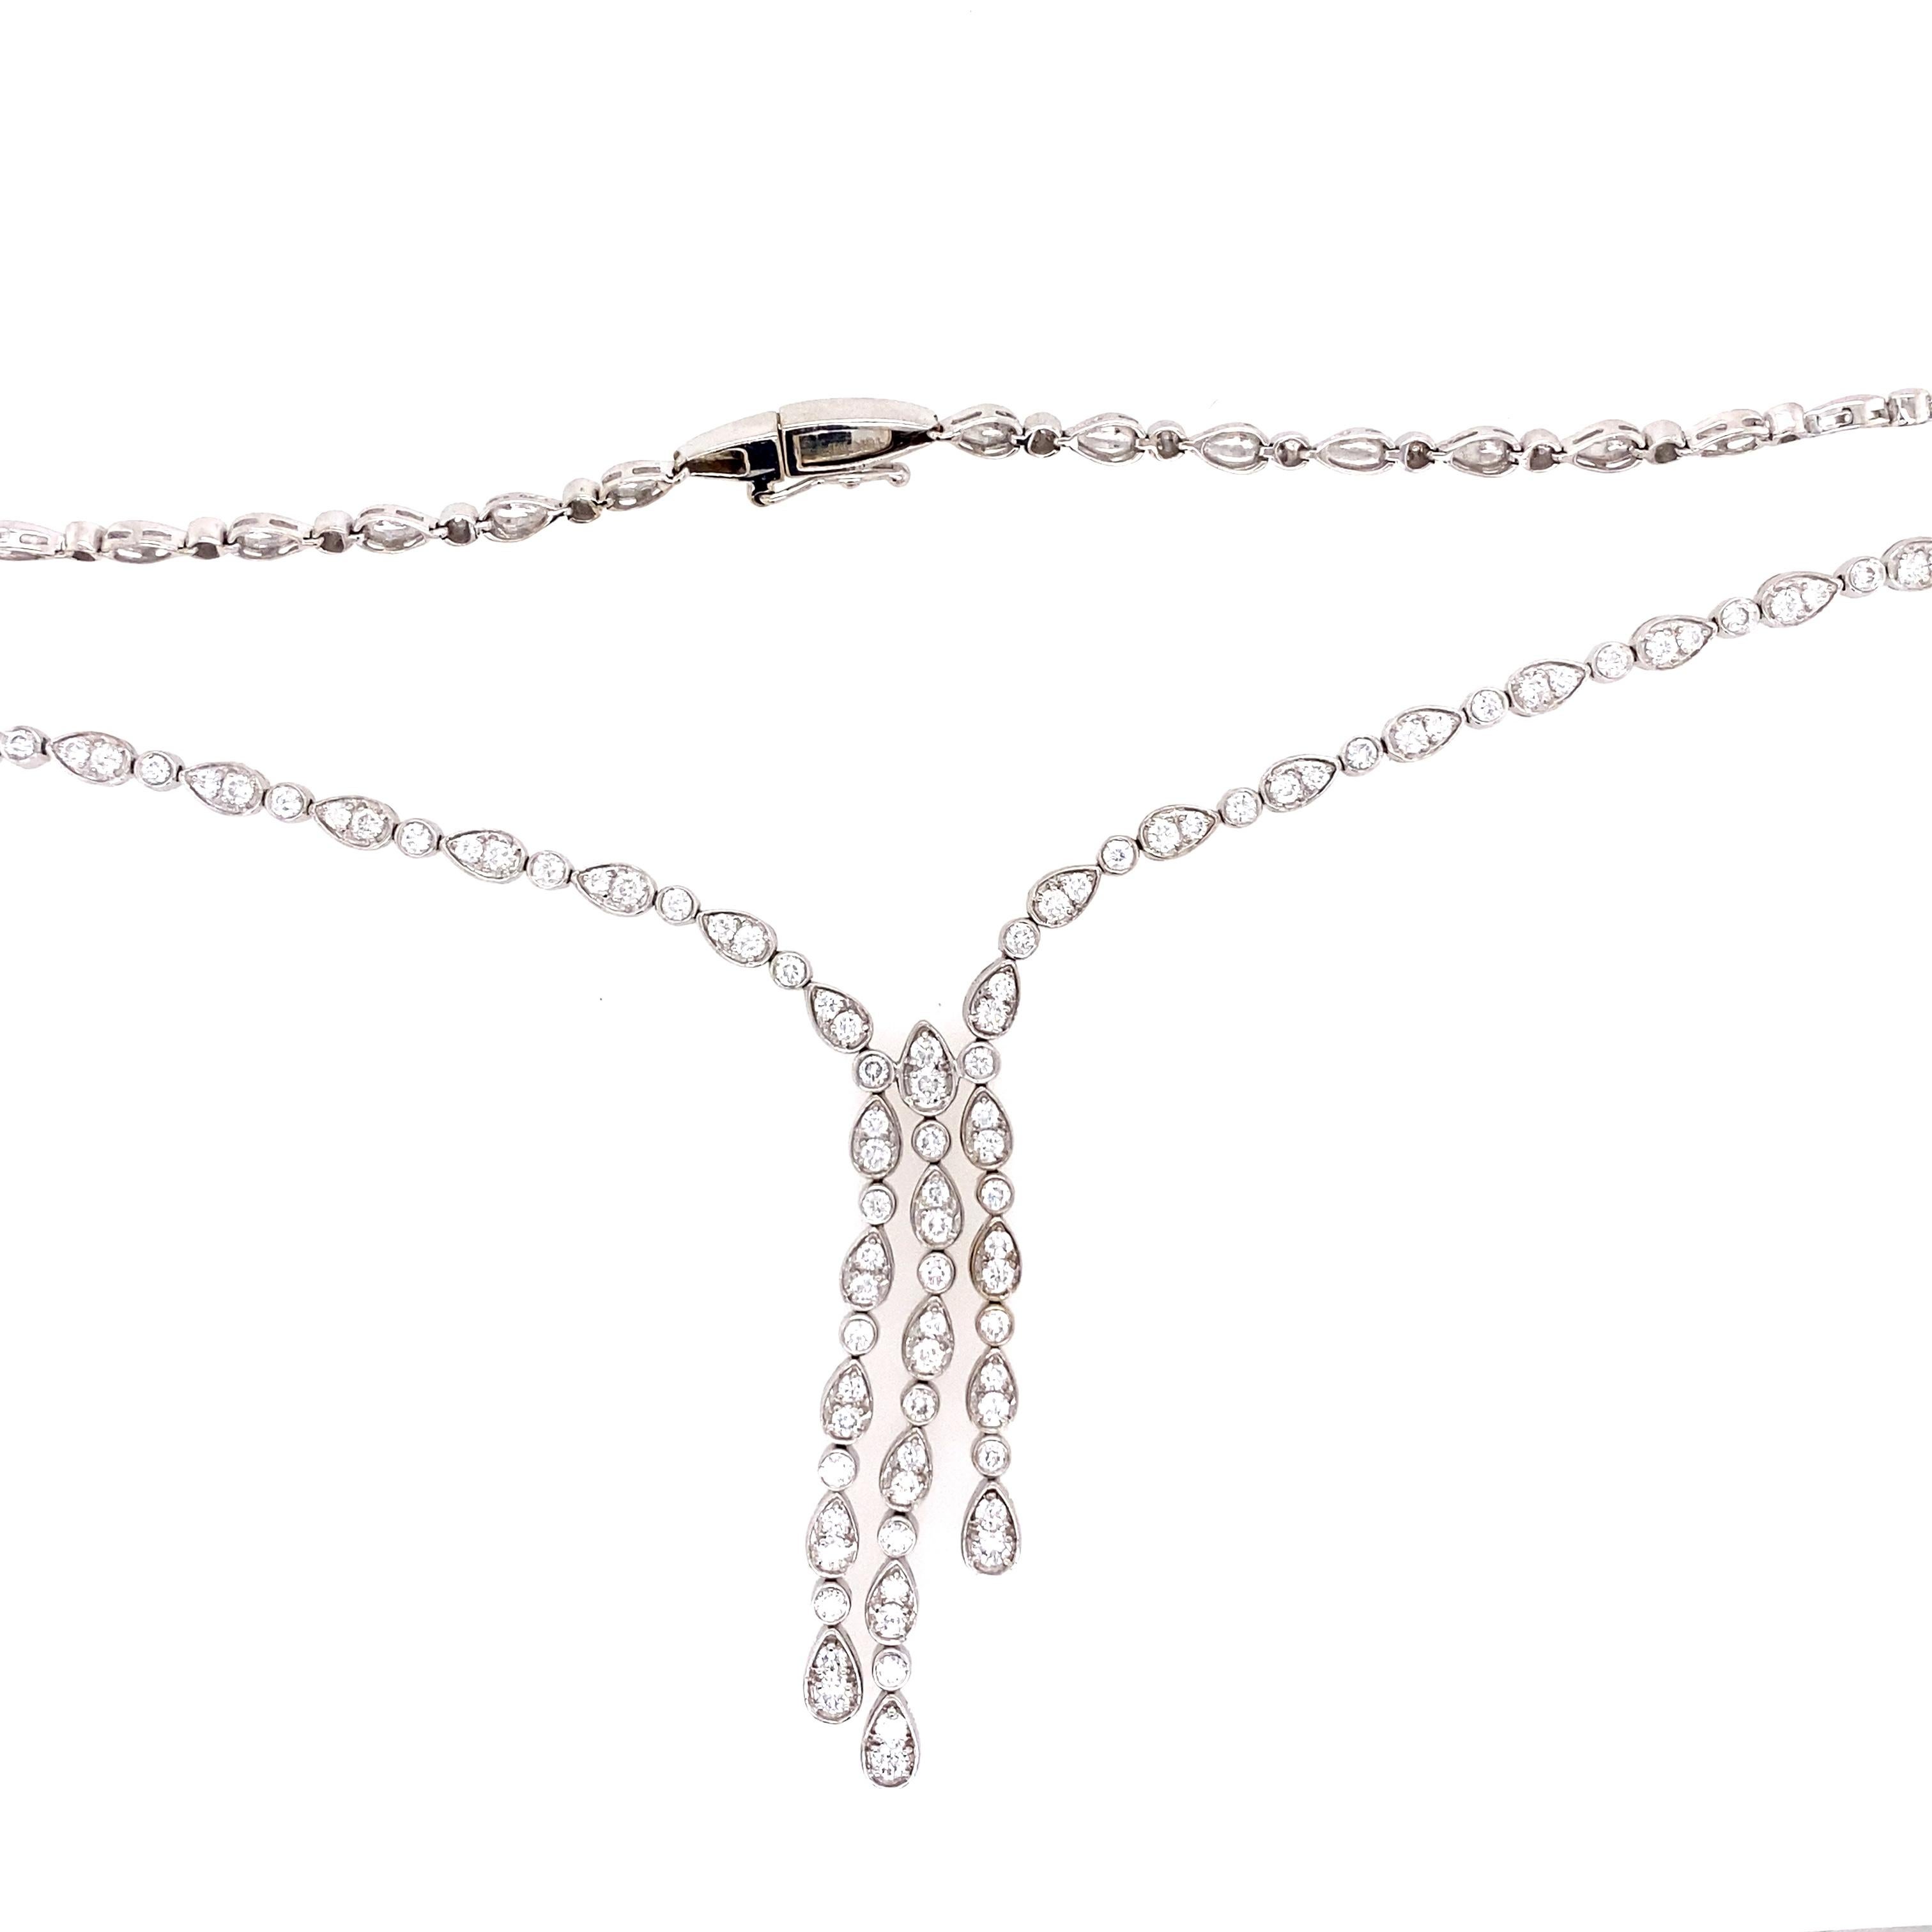 One estate 18 karat white gold diamond (stamped 18K MF) necklace by Martin Flyer bead set with one hundred and three round brilliant diamonds, 2.30 carats total weight with matching H/I color and VS2/SI1 clarity. The necklace measures 15 inches in